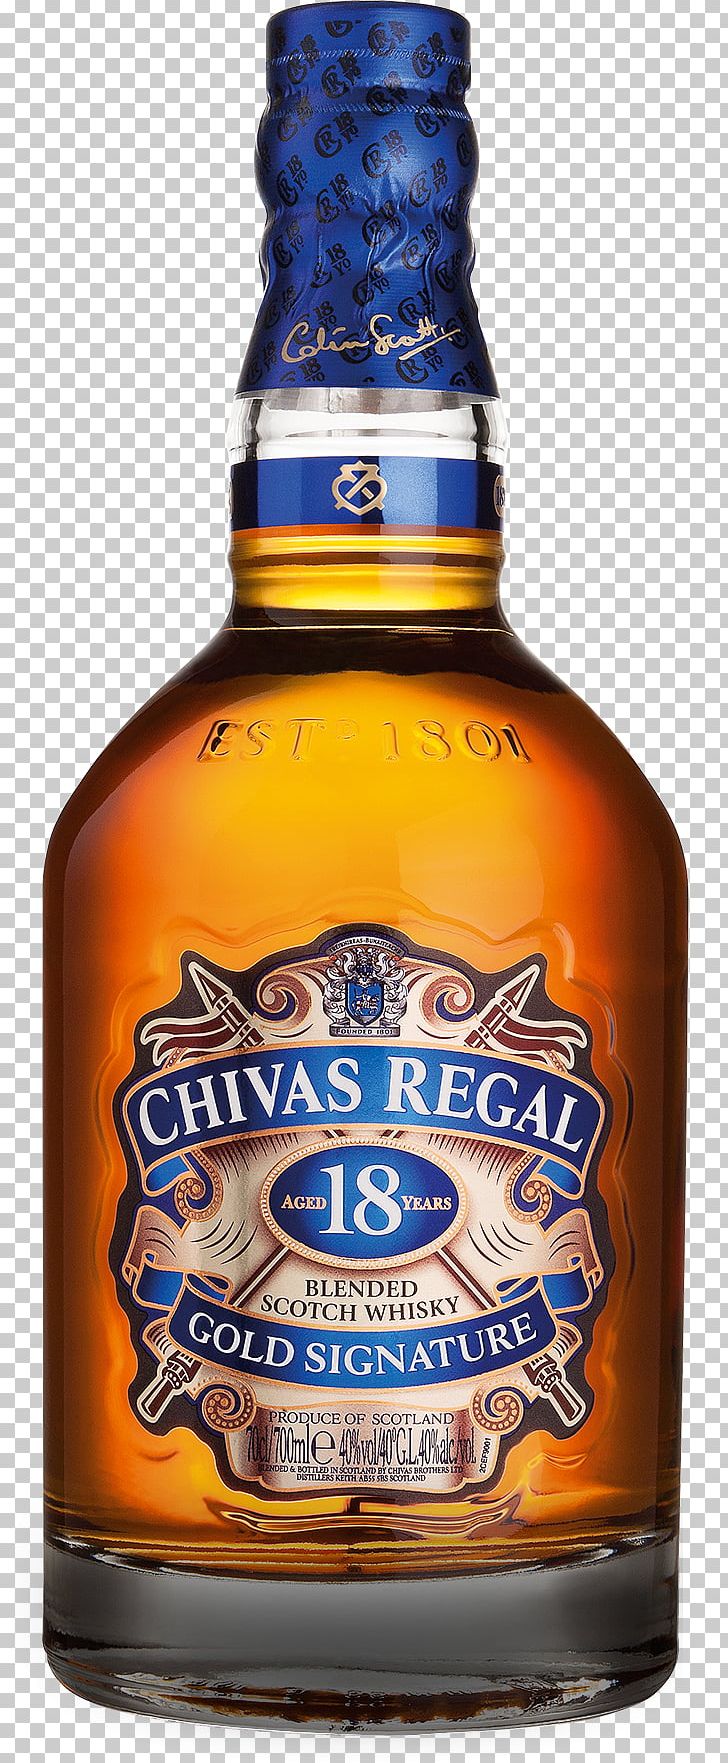 Chivas Regal Blended Whiskey Scotch Whisky Single Malt Whisky PNG, Clipart, 18 Years, Alcohol, Alcoholic Beverage, American Whiskey, Barrel Free PNG Download